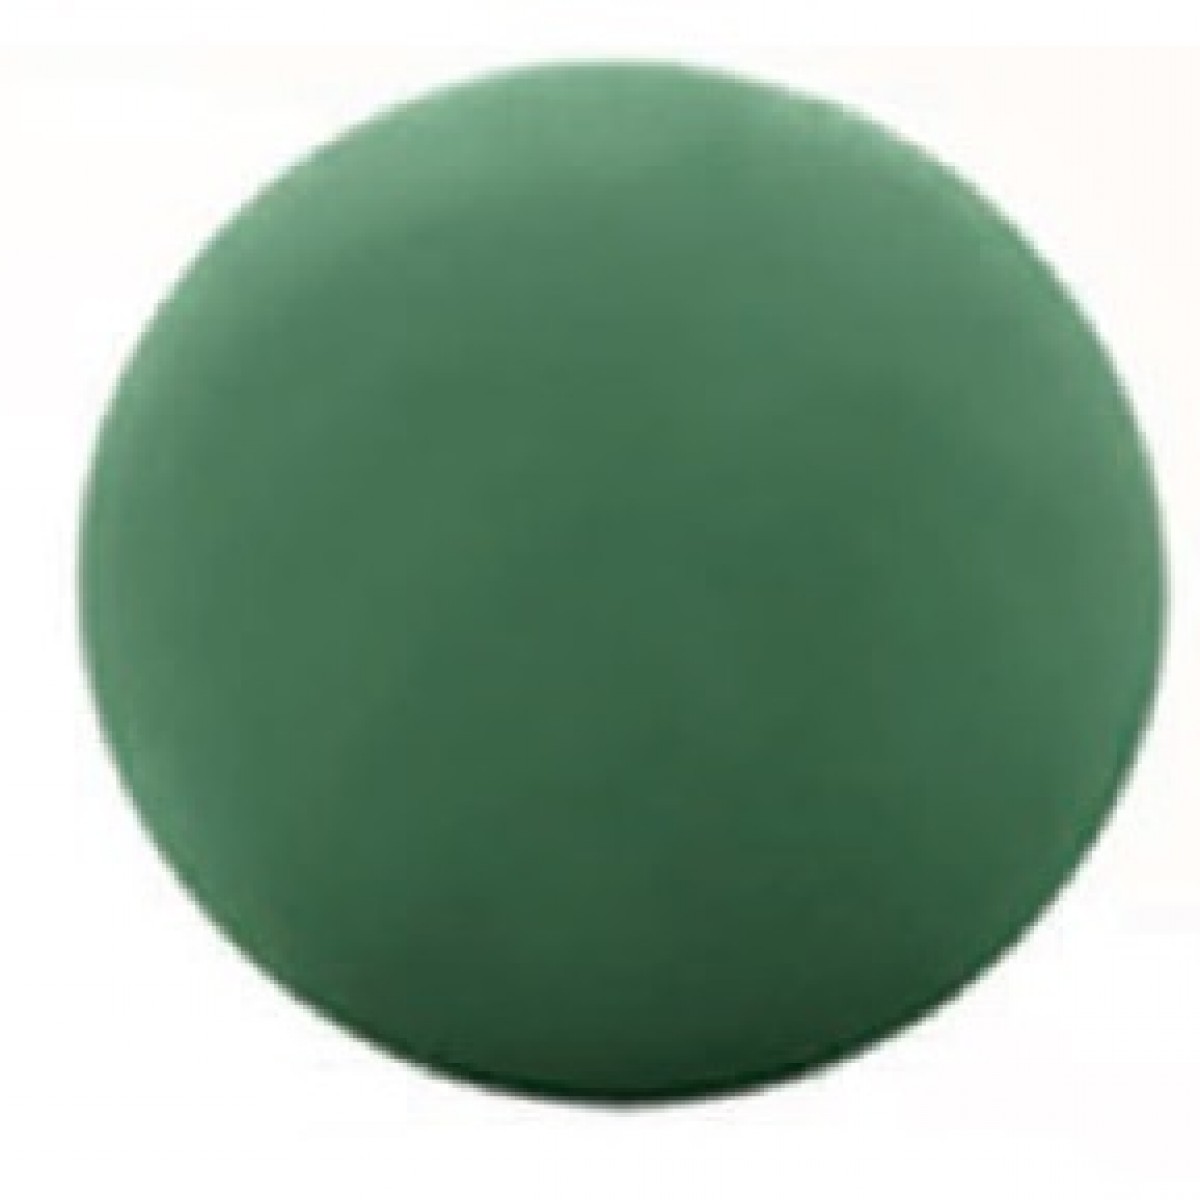 150mm (1 No) Oasis Floral Foam Spheres without Net